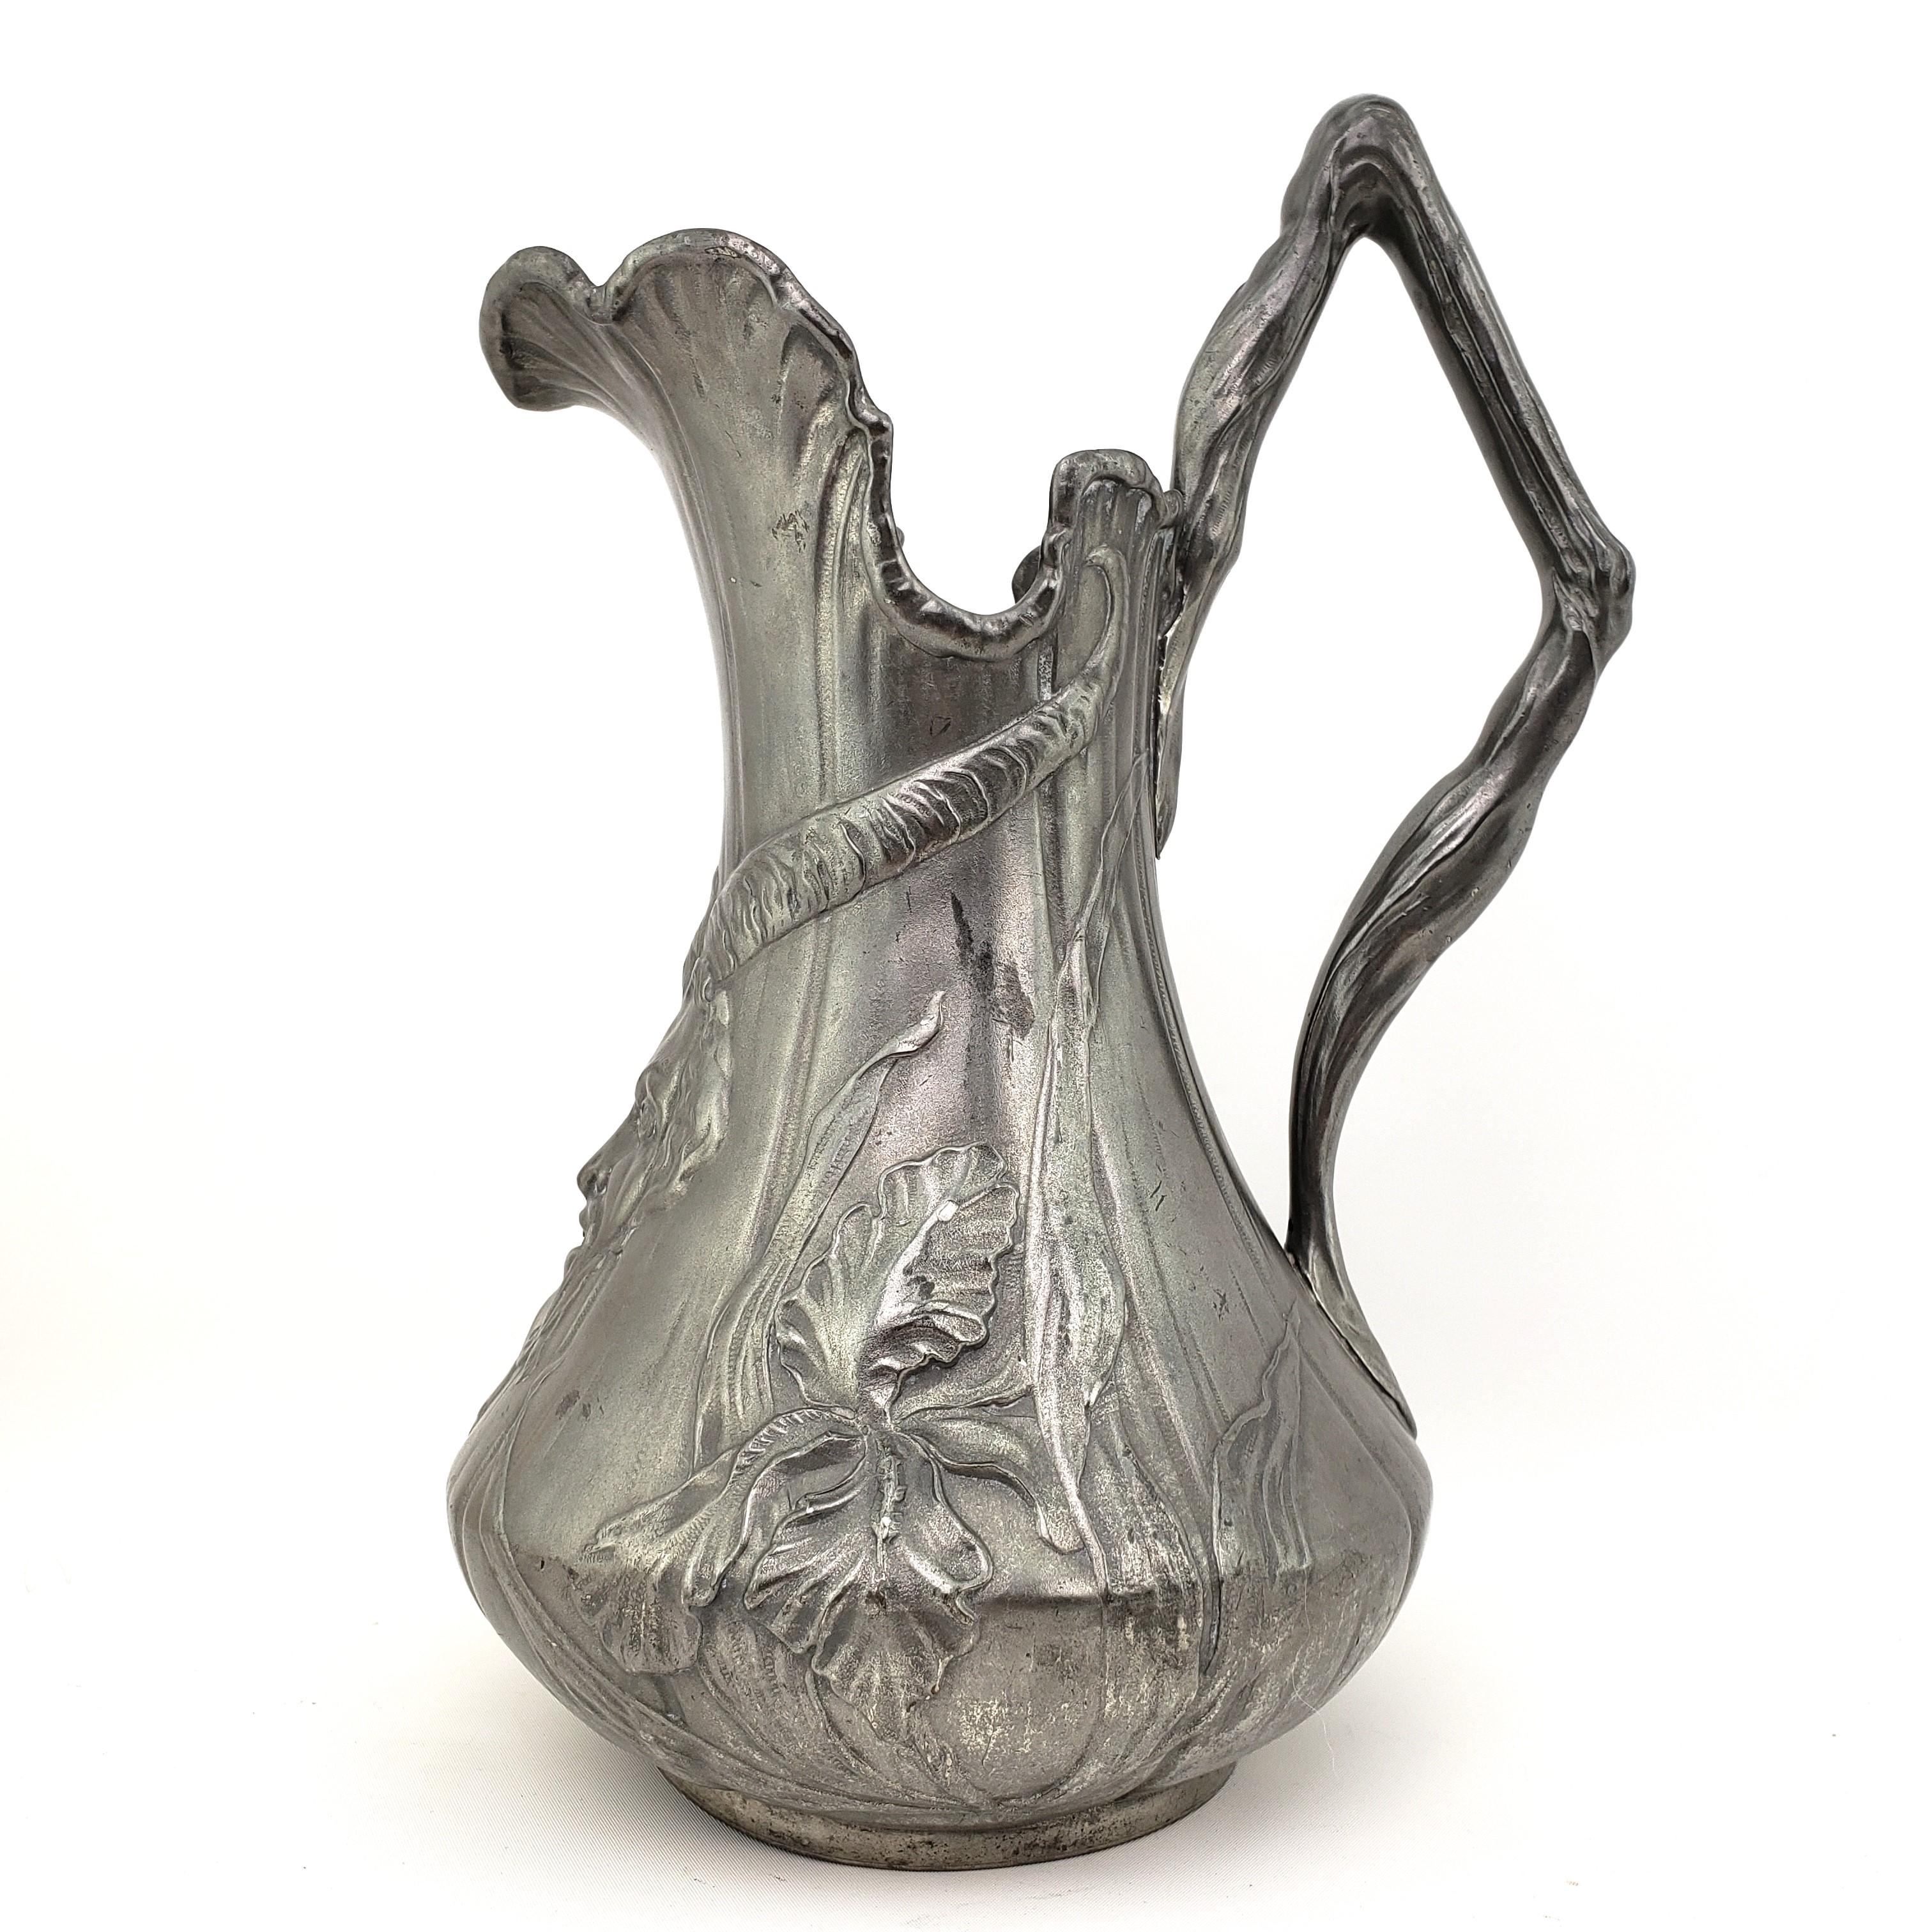 German Kayserzinn pewter wine/water pitcher or jug with Art Nouveau style low relief iris decoration centered by a Devils head under the spout and a handle designed as a vine branch.